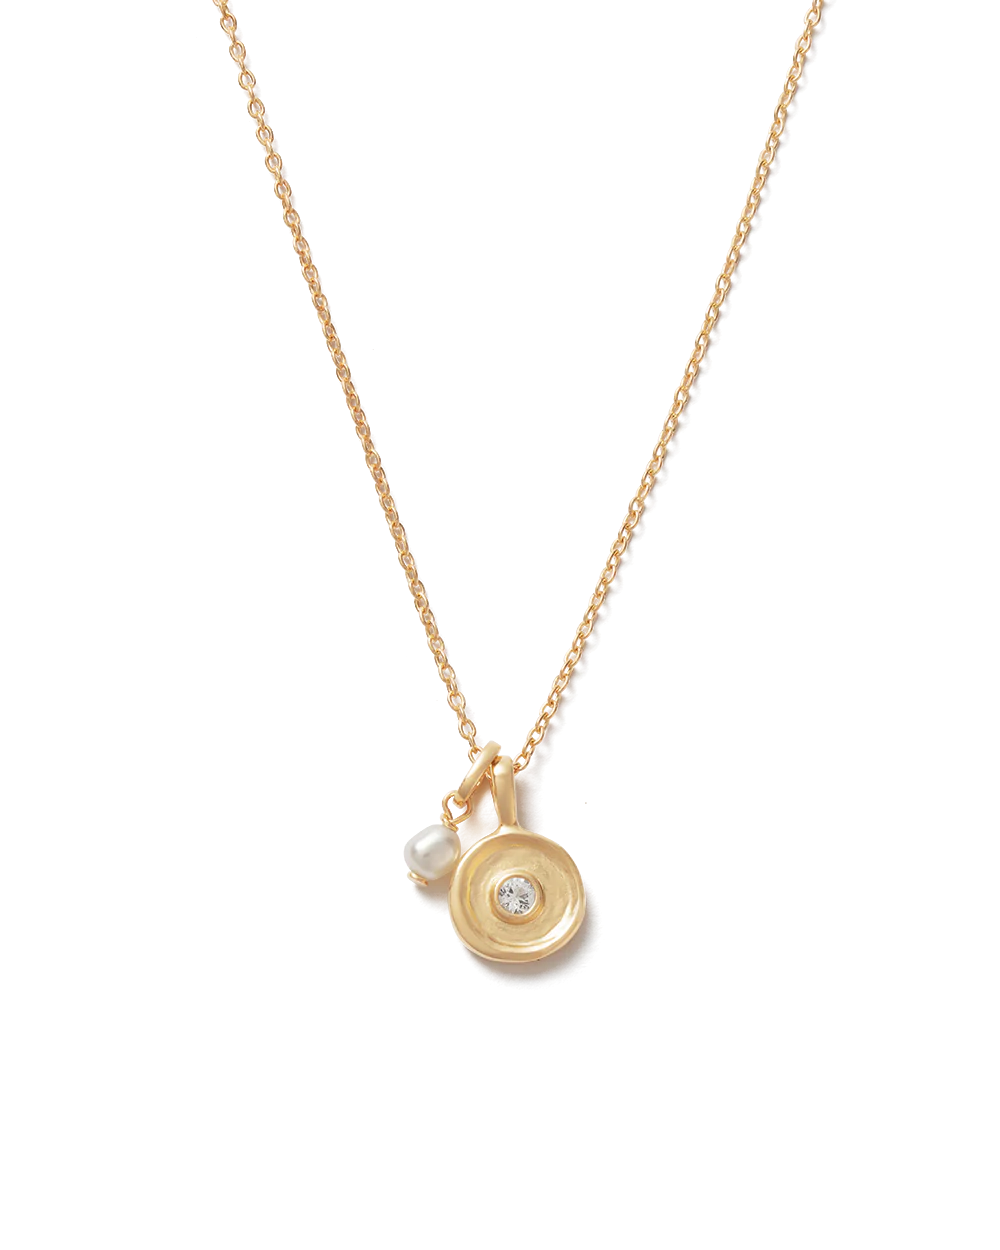 Solstice Pearl Necklace / 18k Gold Plated